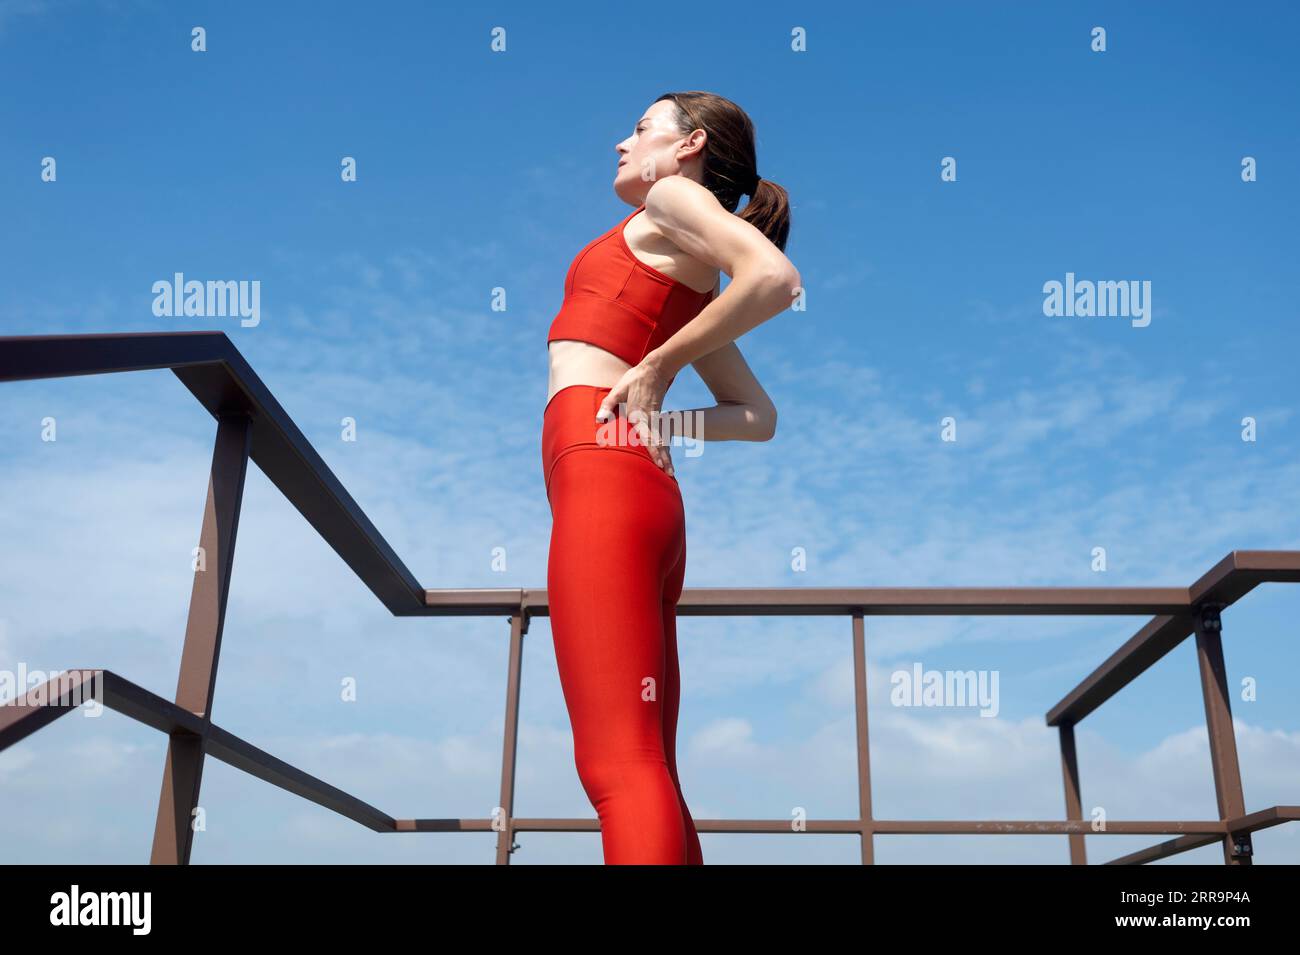 Woman athlete pausing to relieve her back pain Stock Photo